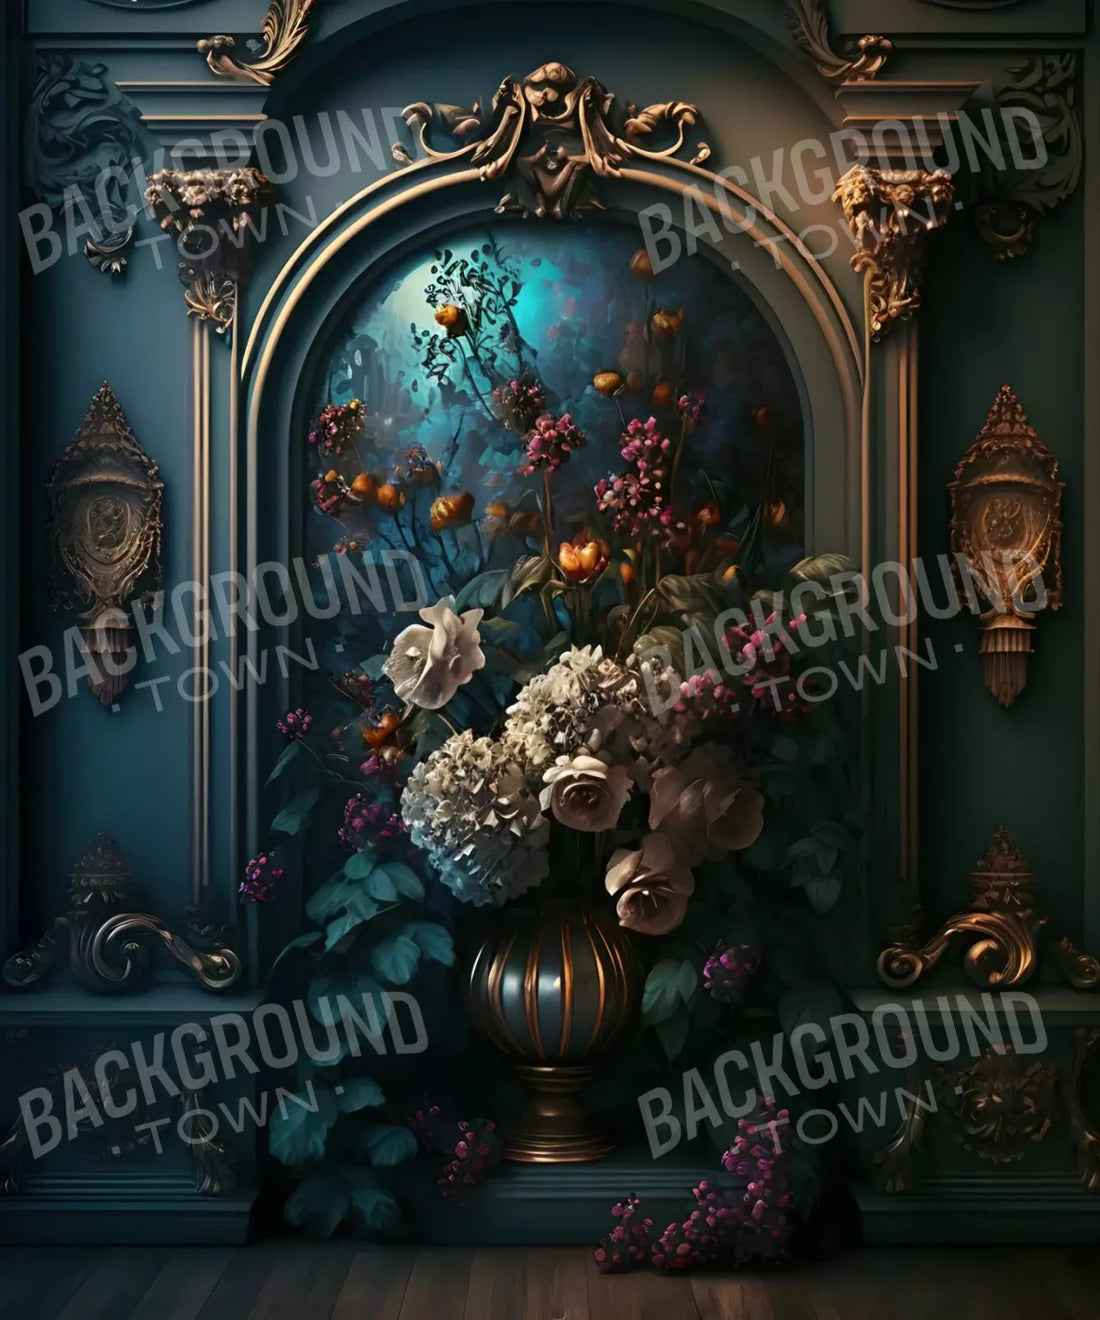 [flowers] [vintage] [arch] Backdrop for Photography